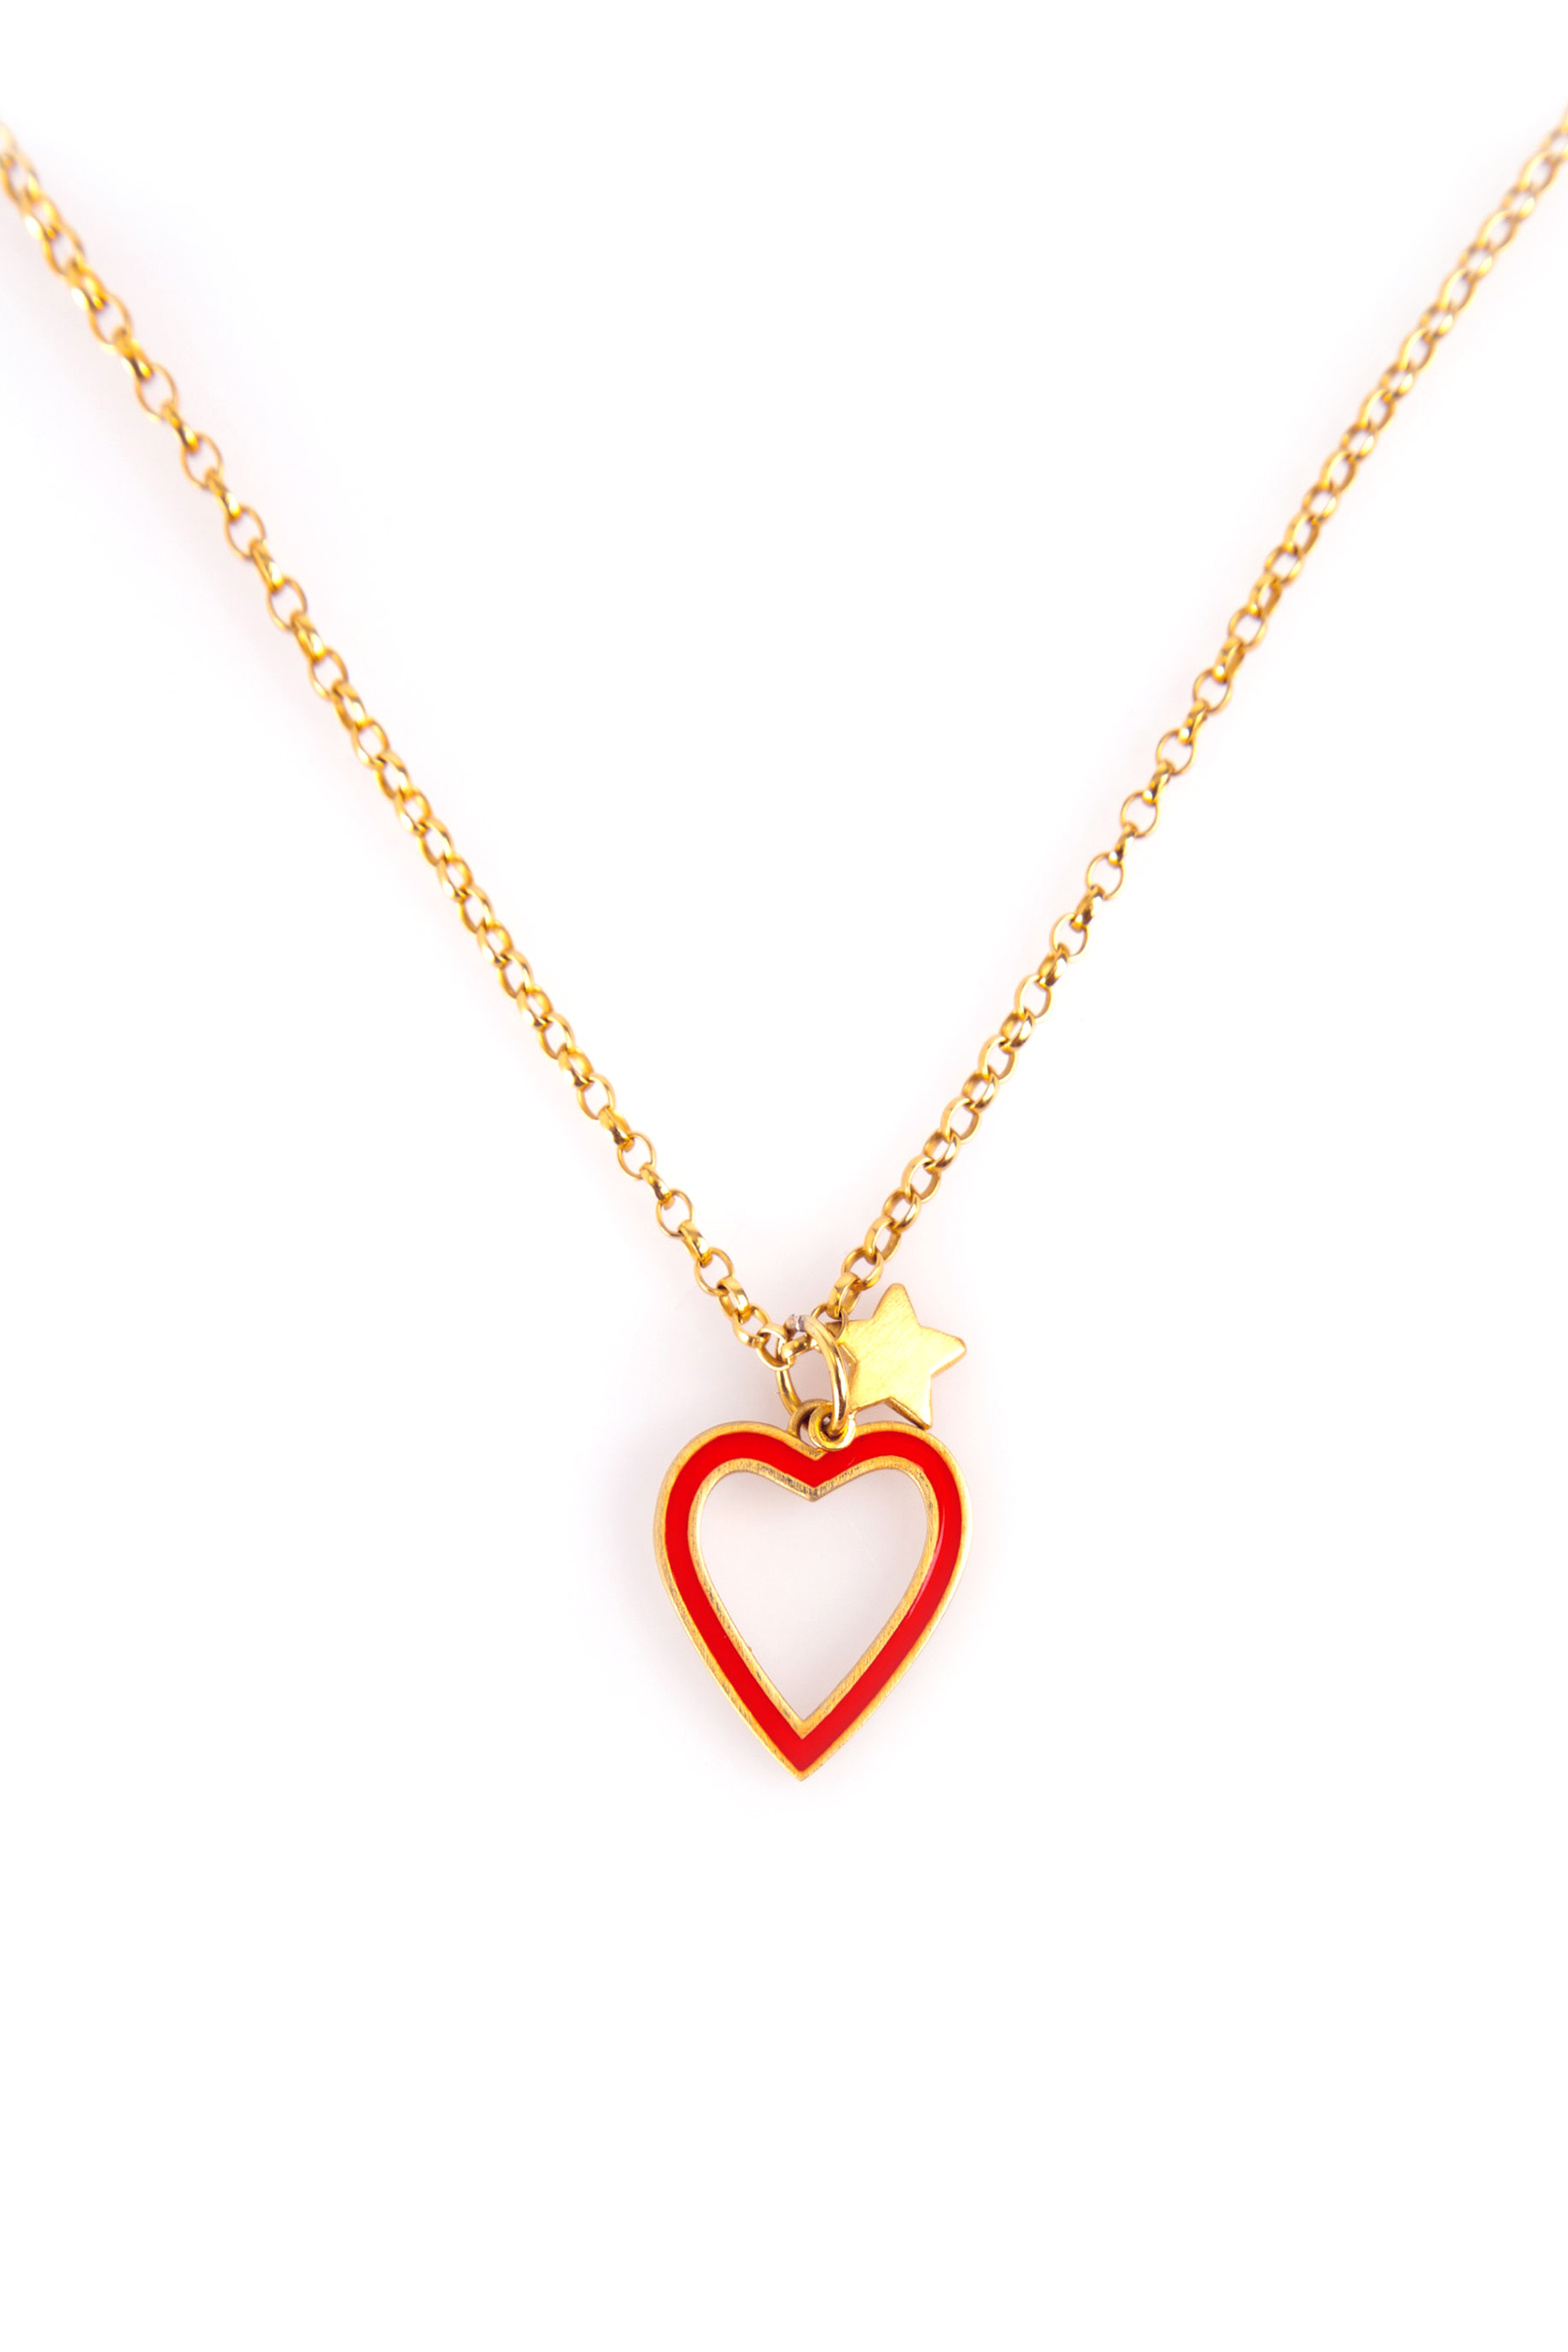 cb163_heart_necklace_red_white_background.jpg